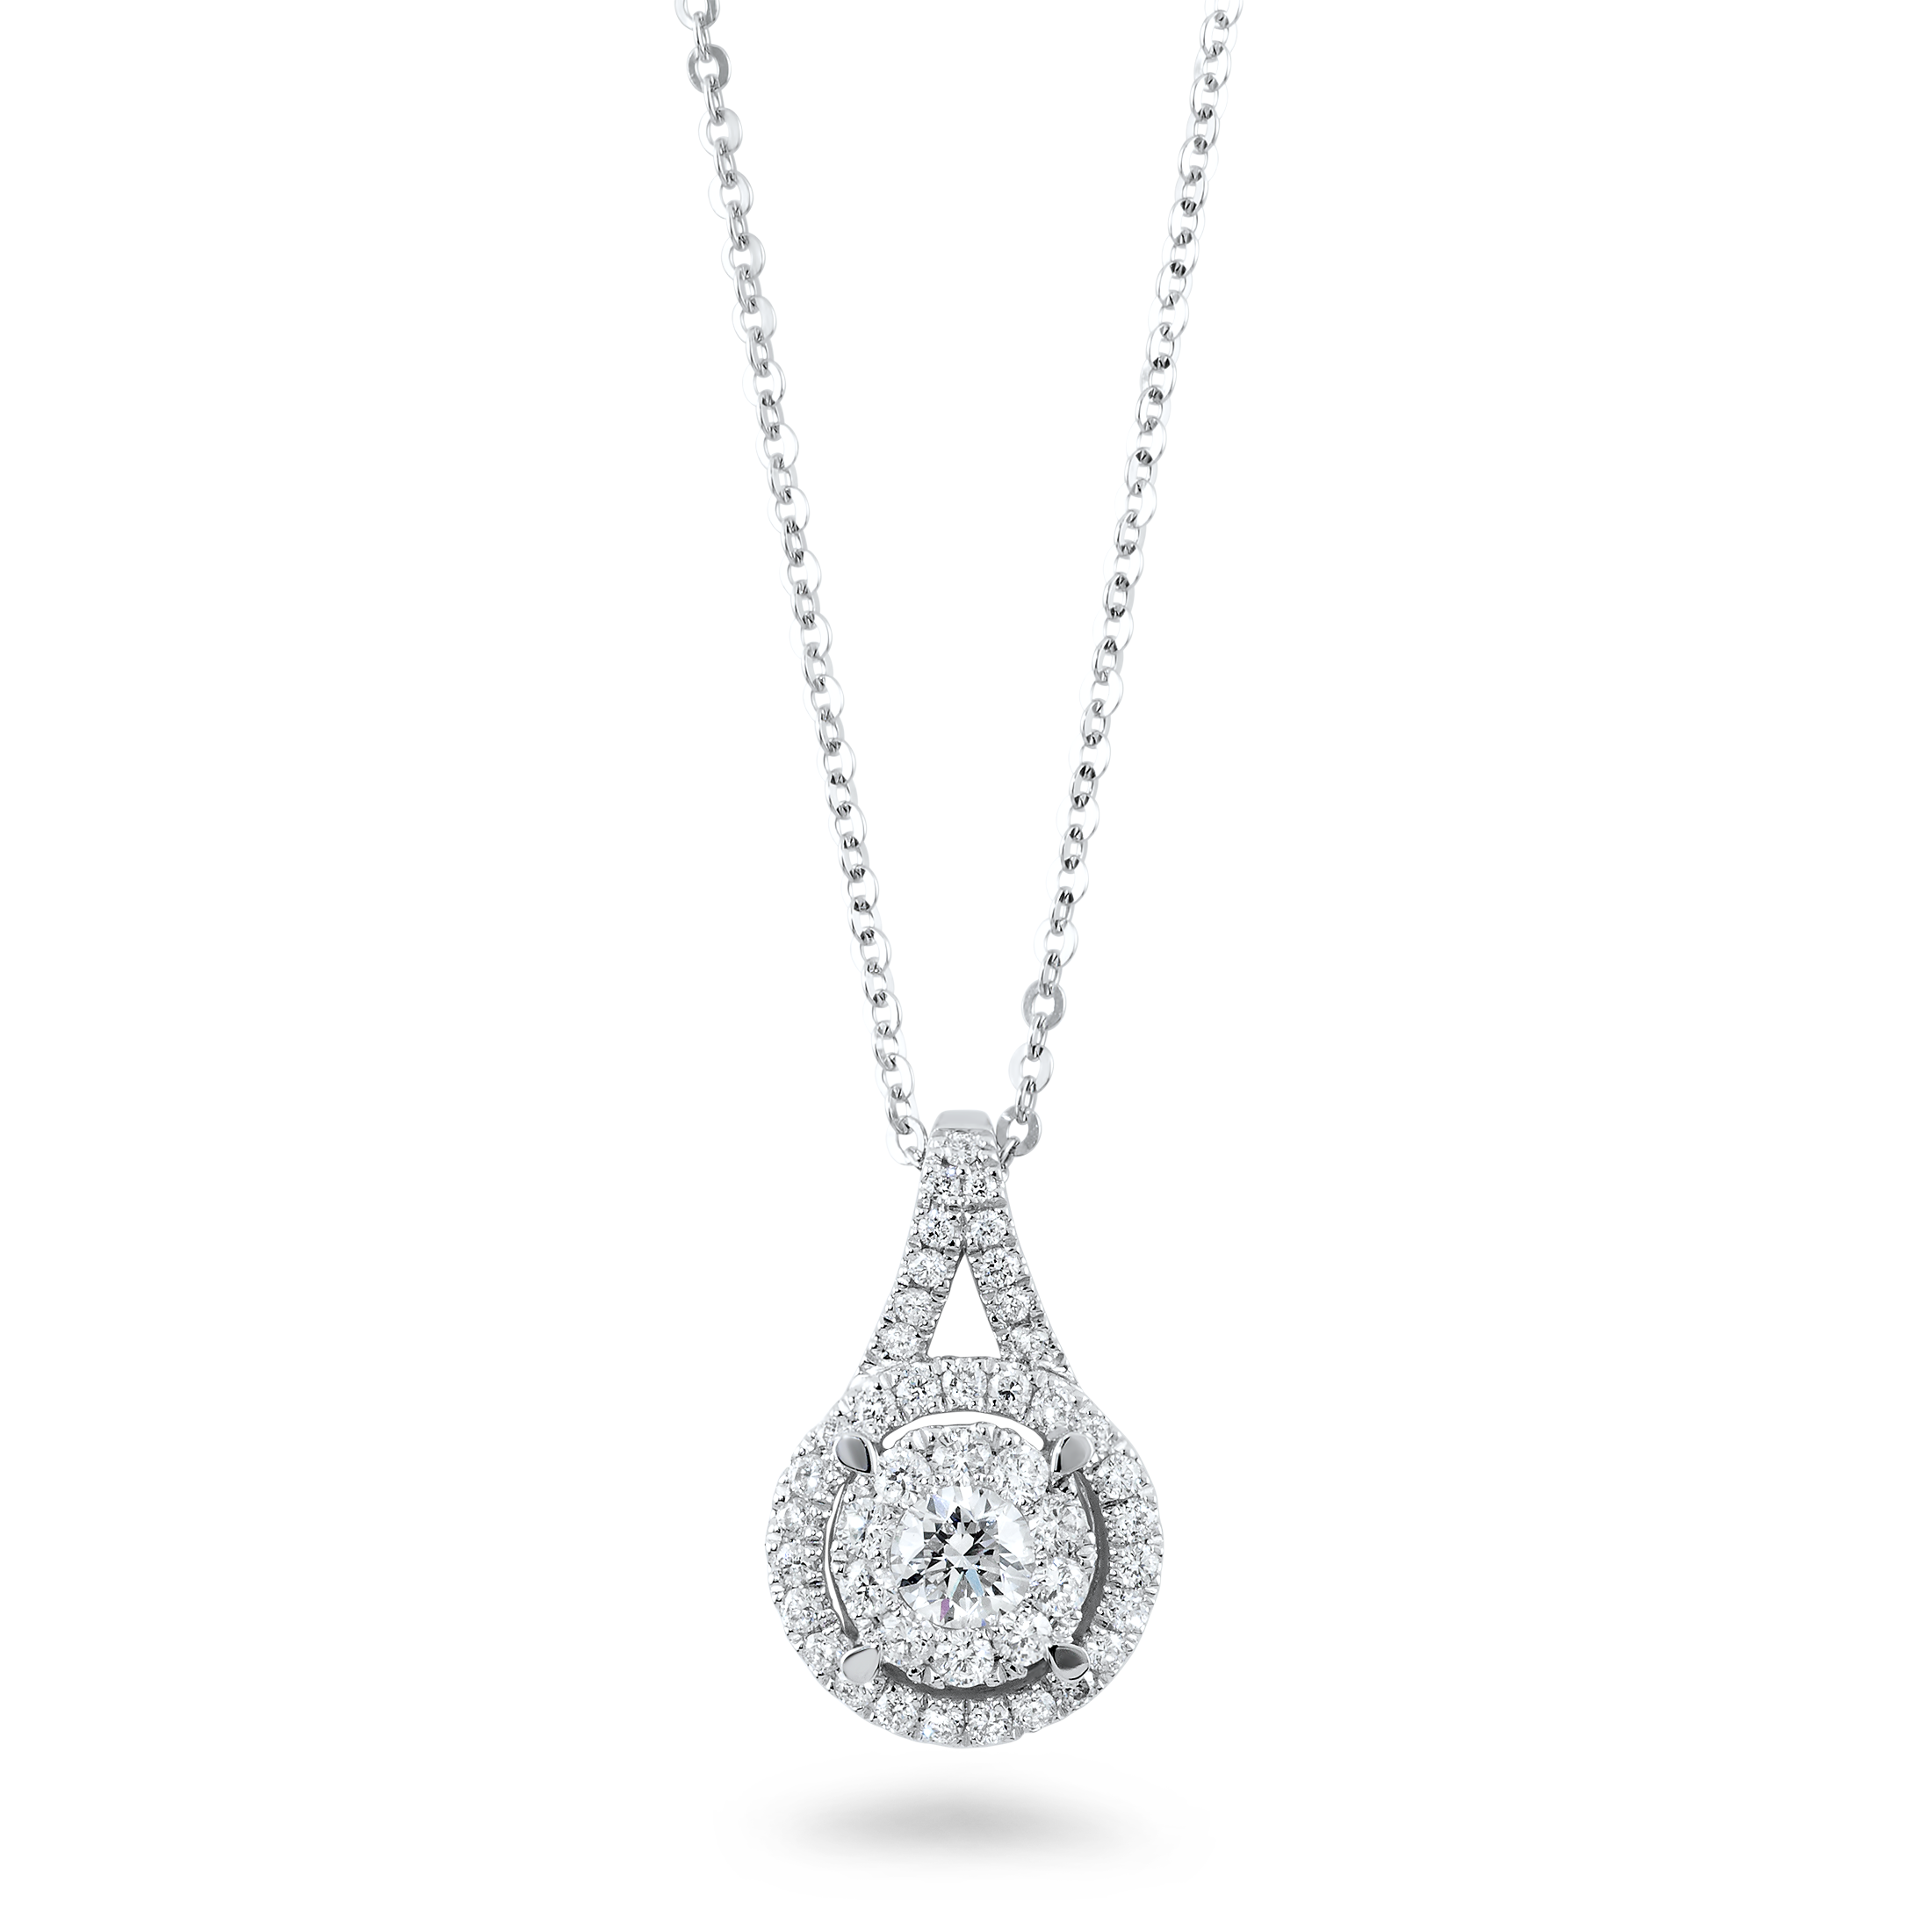 Diamond Necklace PNG Image